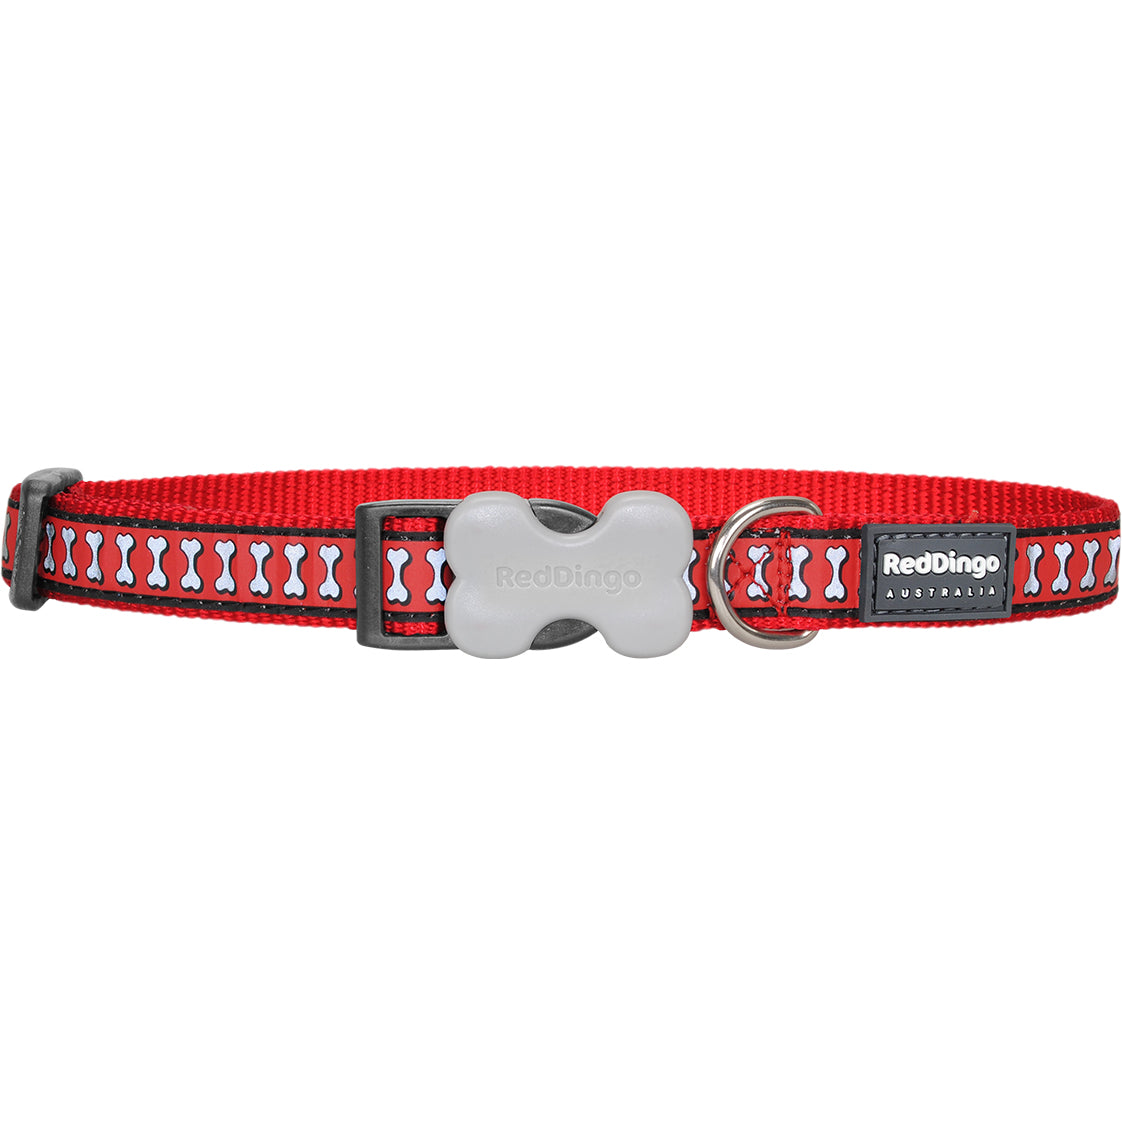 Red Dingo Reflective Red Dog Collar